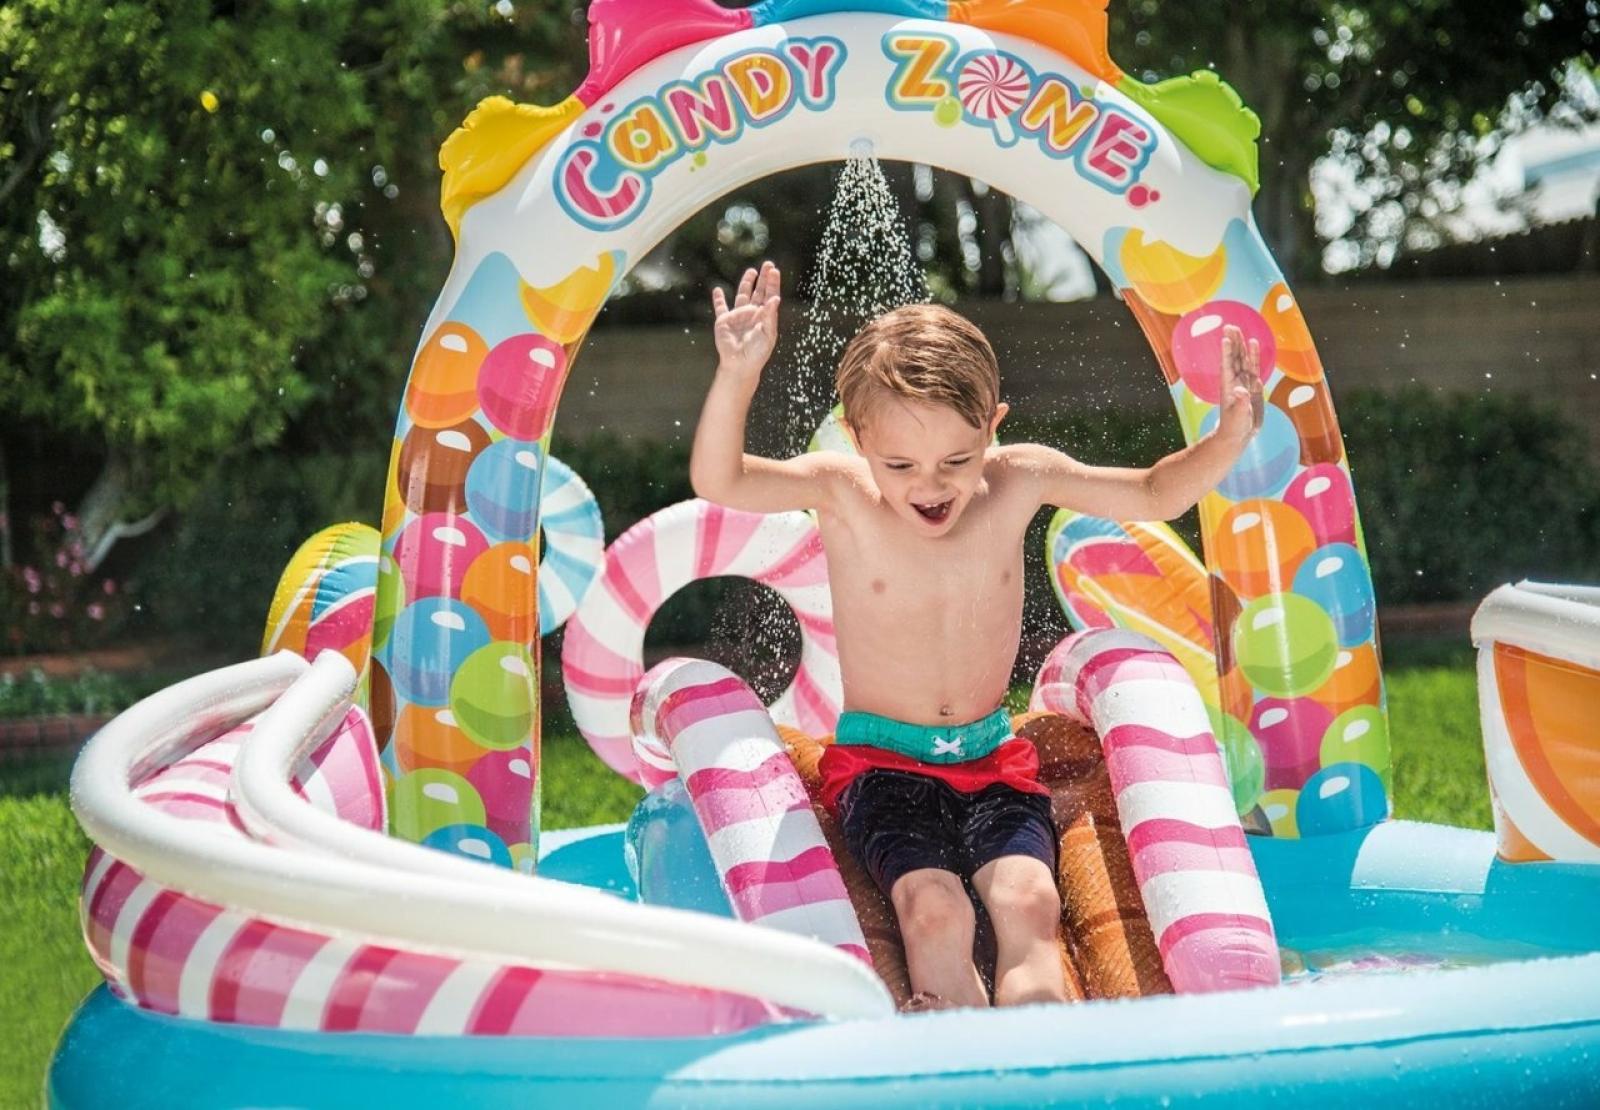 Intex Candy Zone Inflatable Play Center With Slide